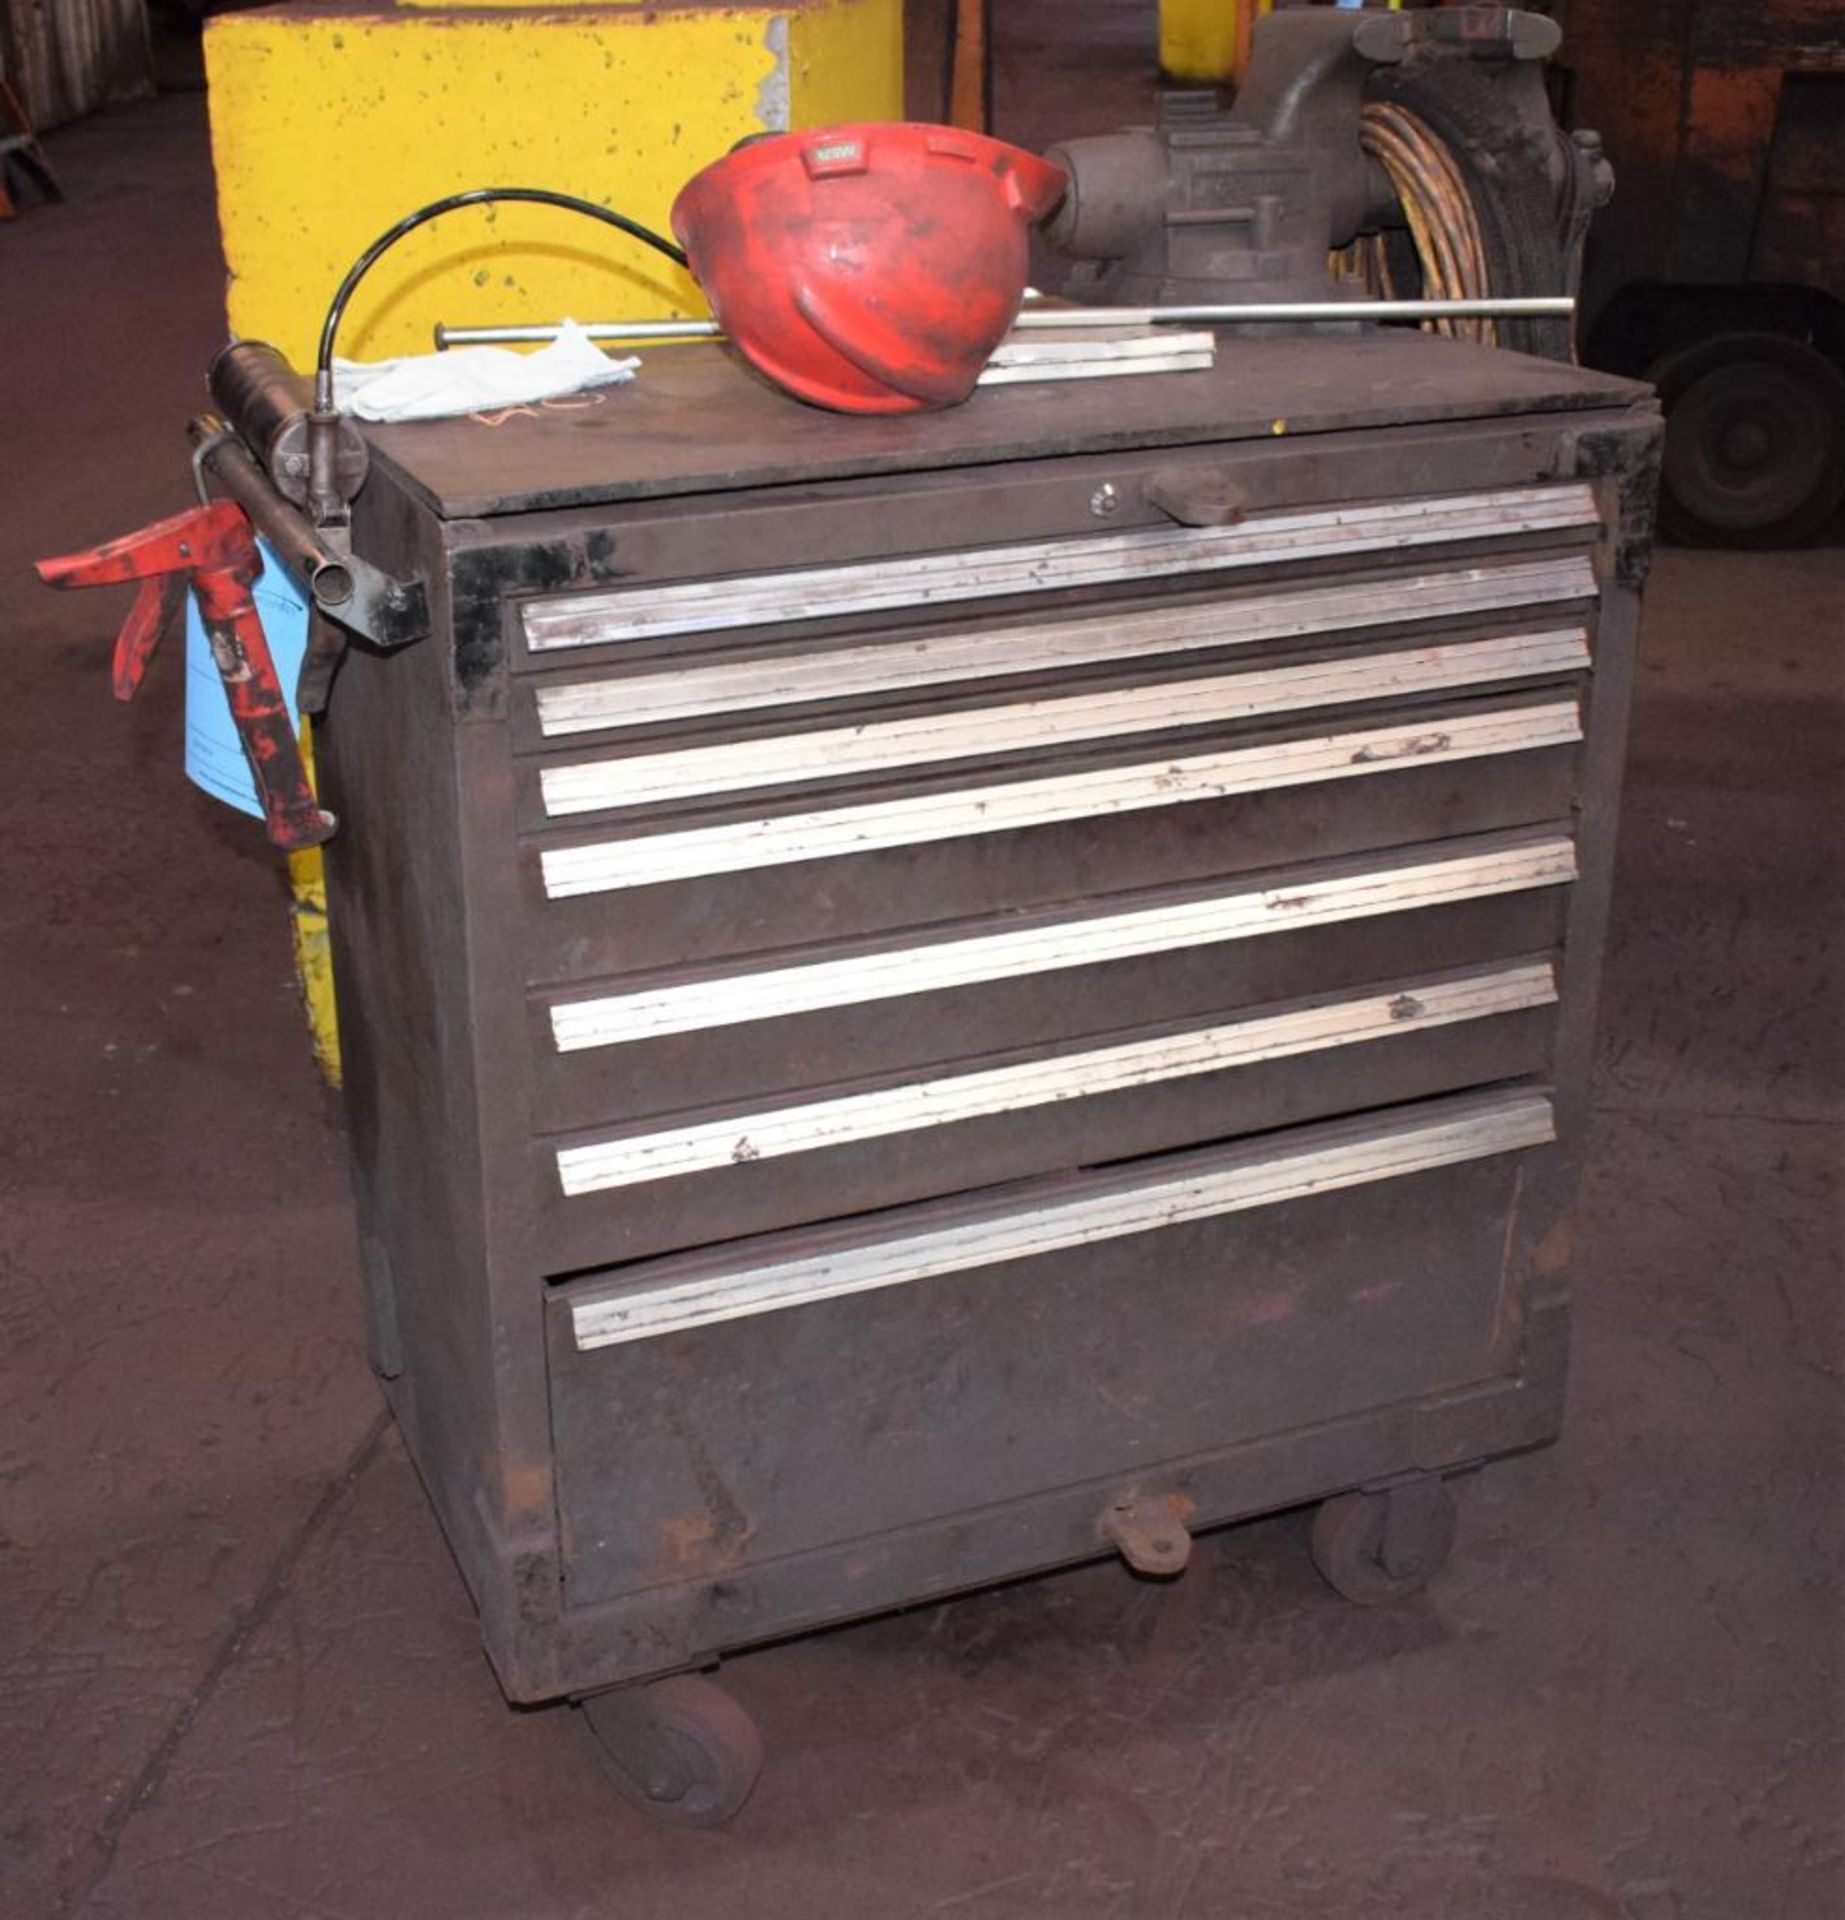 (1) 7 Drawer Rolling Tool Box. With vise & miscellaneous tools.